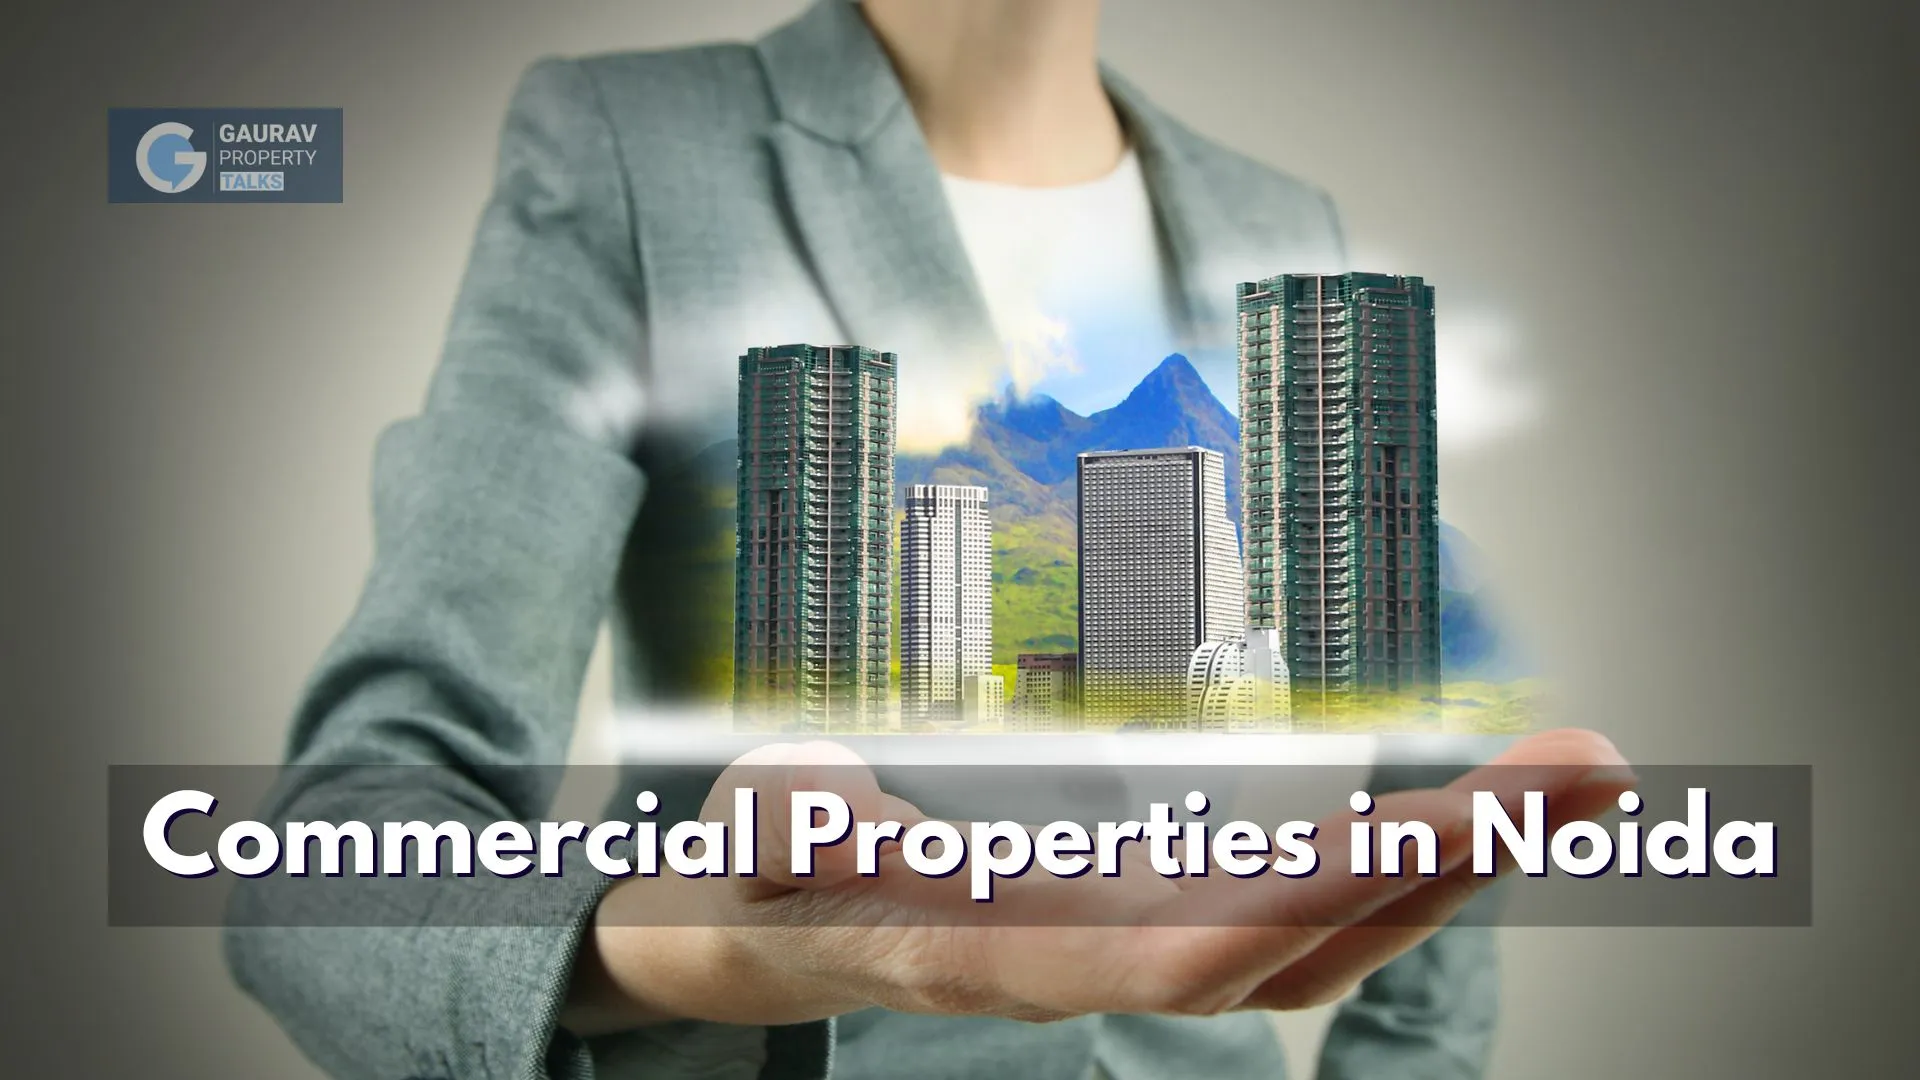 Guide On Investing In Commercial Properties In Noida